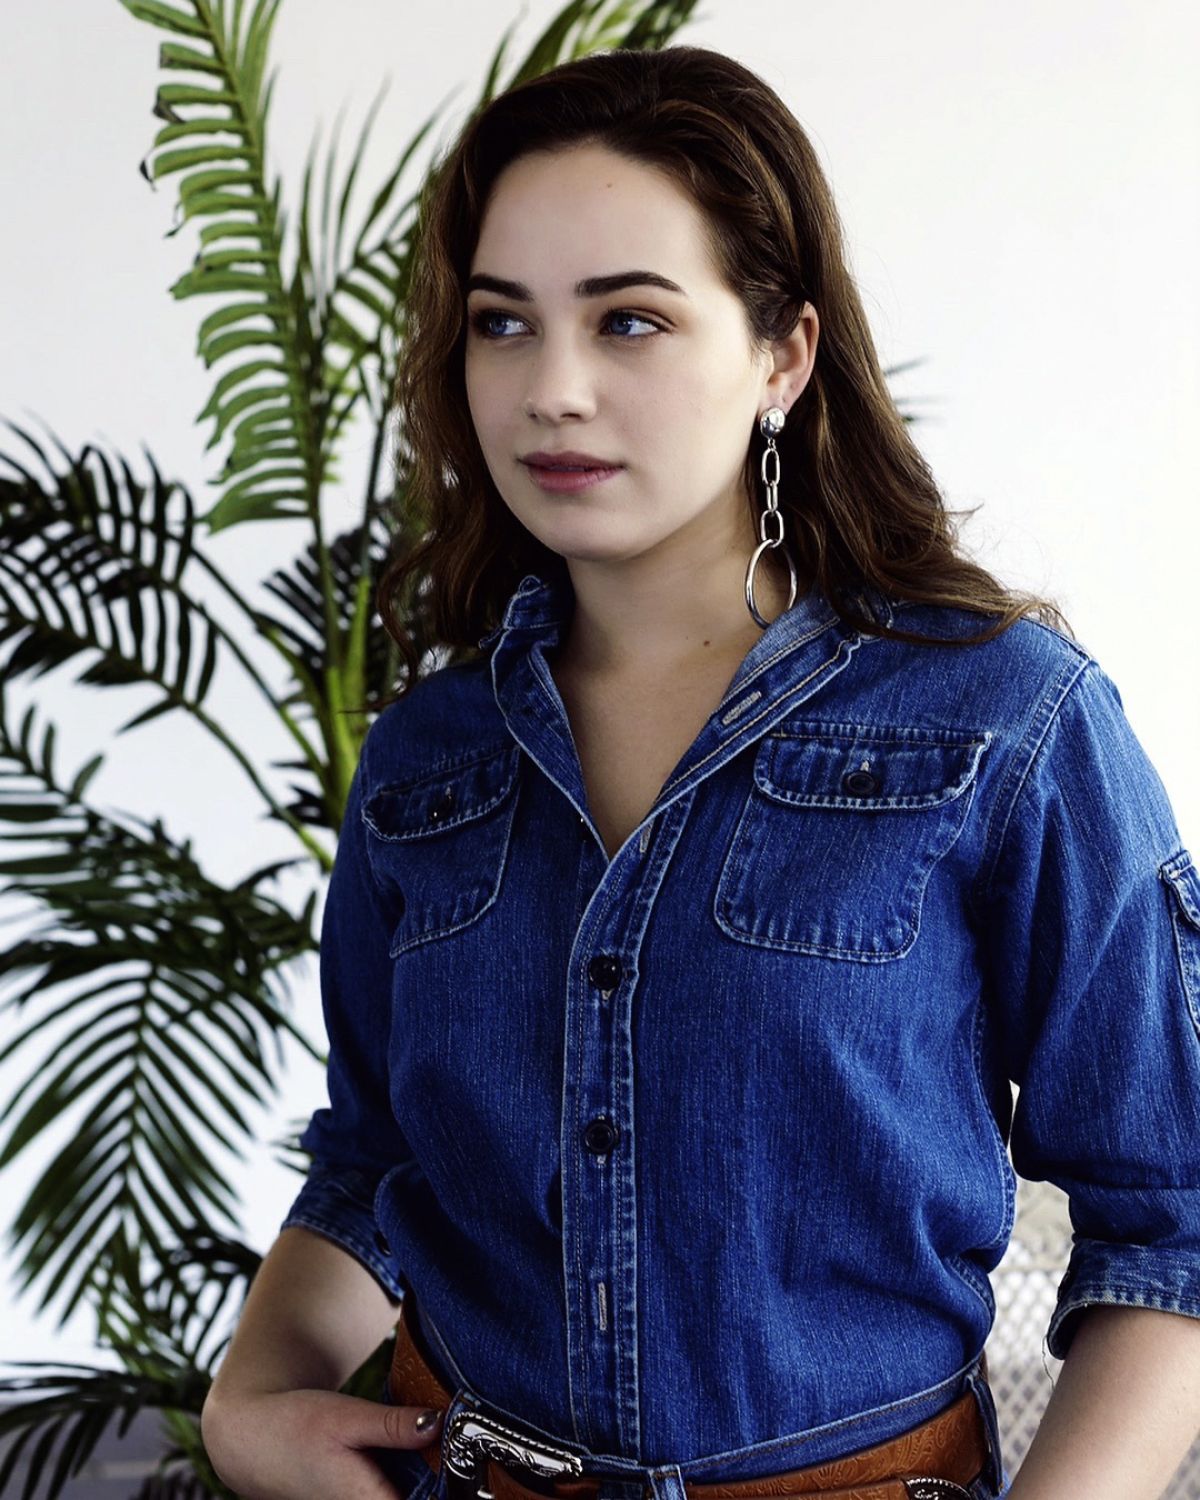 MARY MOUSER in Avante Magazine, July 2018.